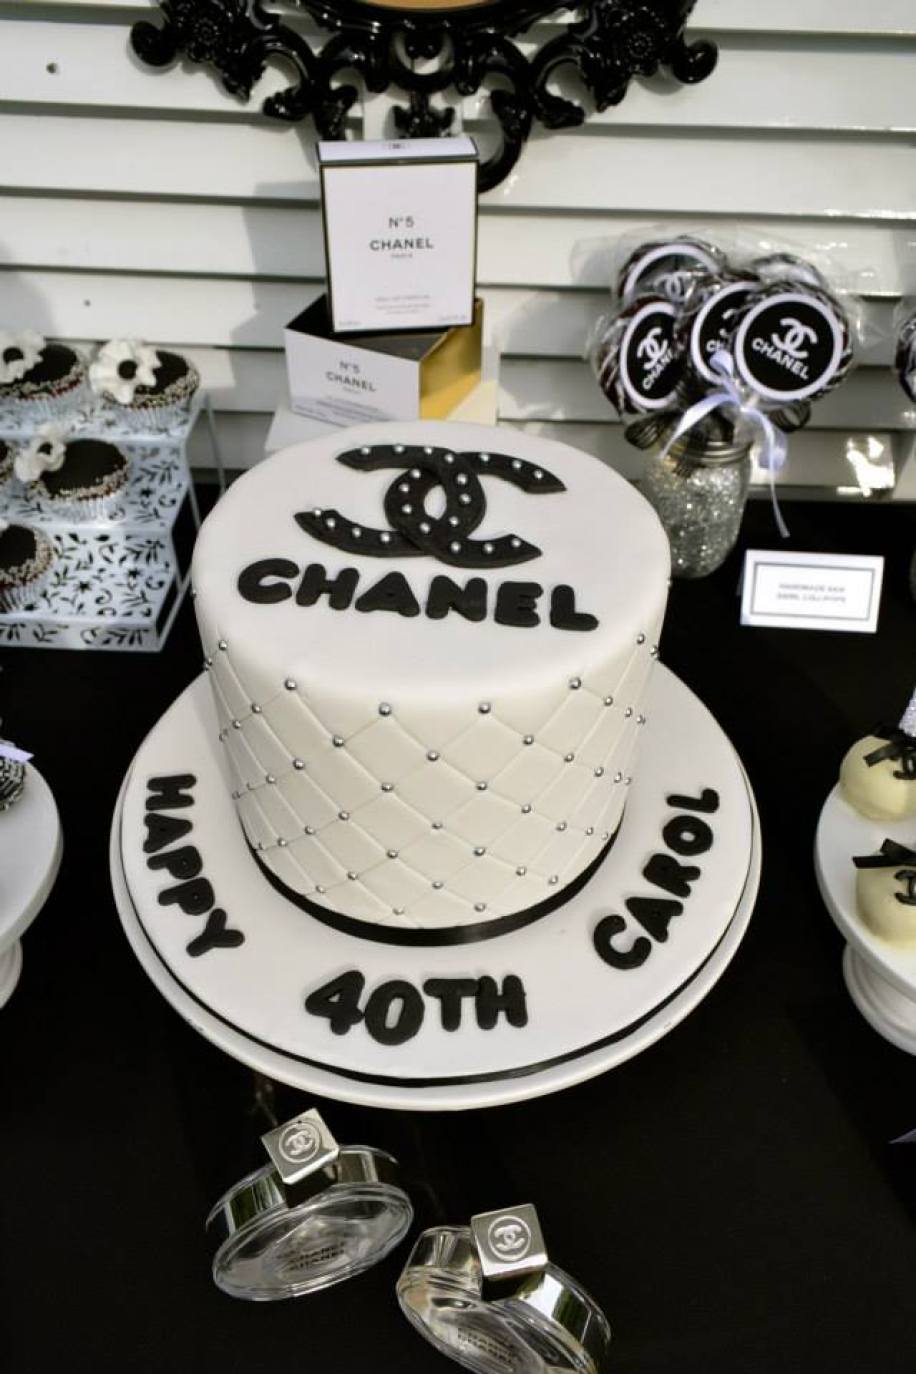 Chanel themed party cake